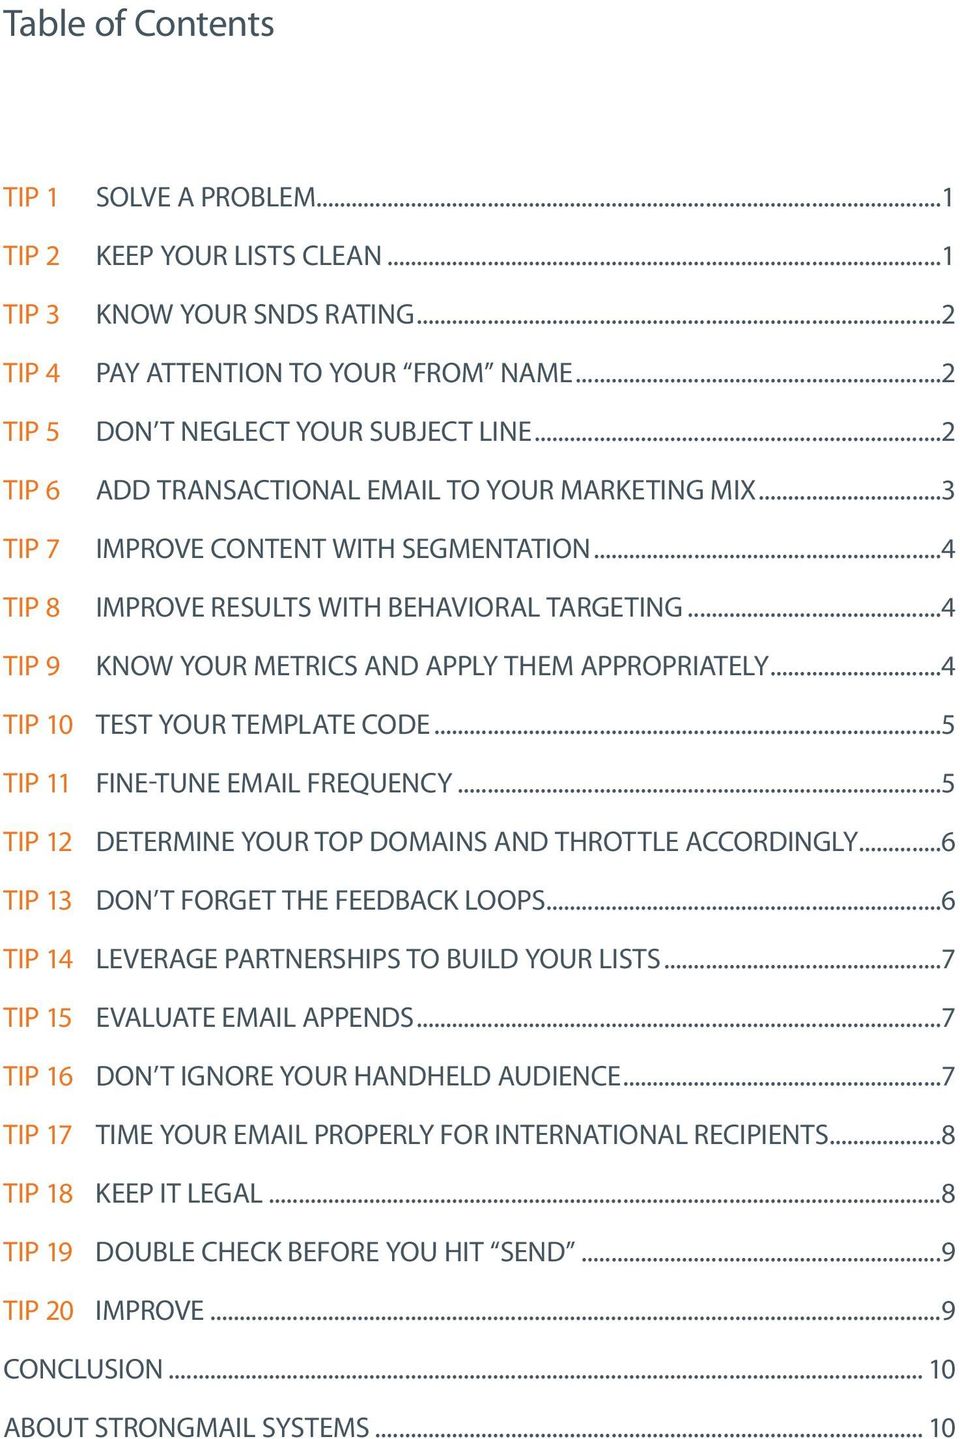 ..4 Know Your Metrics and Apply Them Appropriately...4 Tip 10 Test Your Template Code...5 Tip 11 Fine-tune Email Frequency...5 Tip 12 Determine Your Top Domains and Throttle Accordingly.